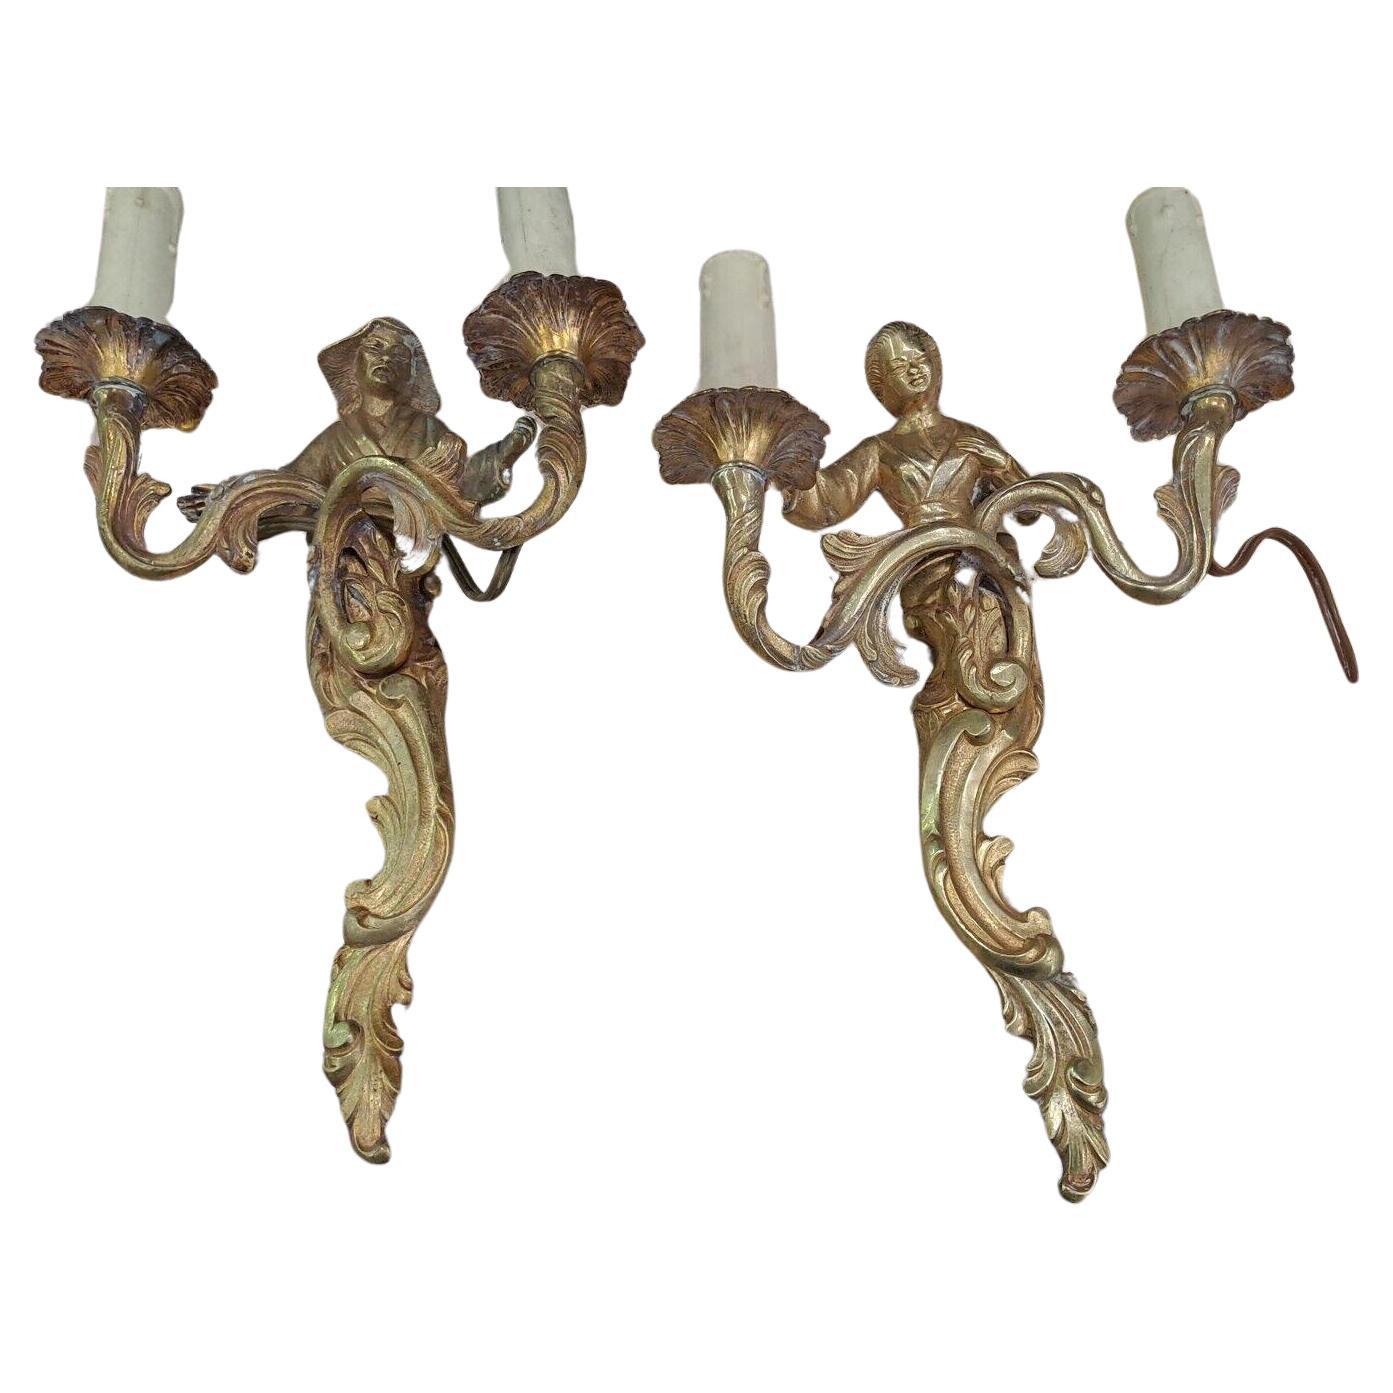 Pair 19thc French Louis XVI style Gilt Bronze "Japonisant" Figural Wall Sconces